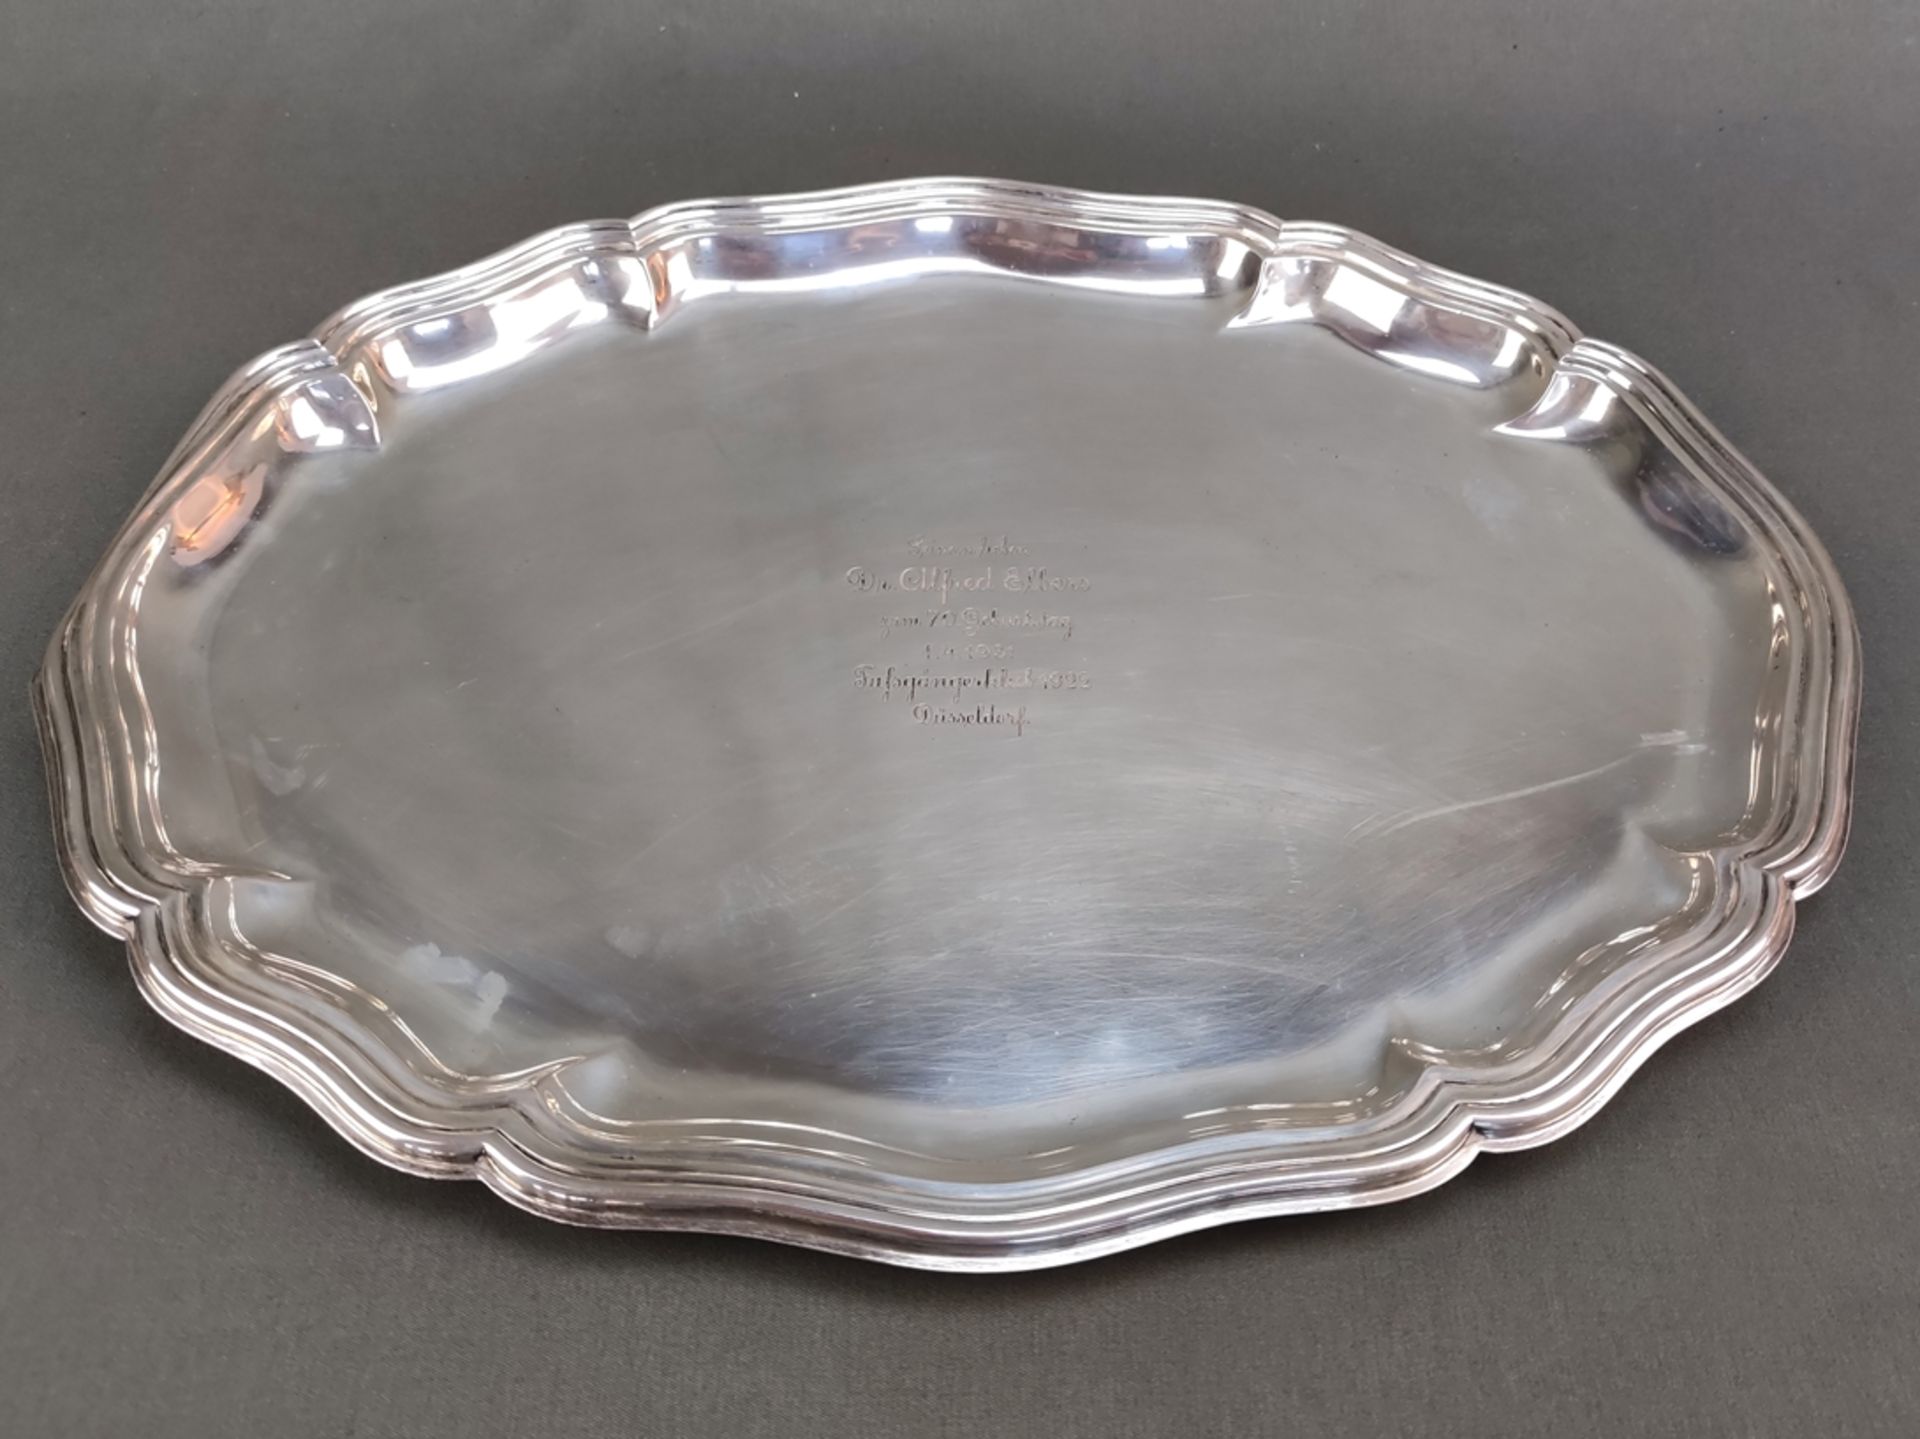 Oval tray, silver 830 (hallmarked), 500g, maker's mark "Wilkens", curved stepped rims, centre with - Image 2 of 3